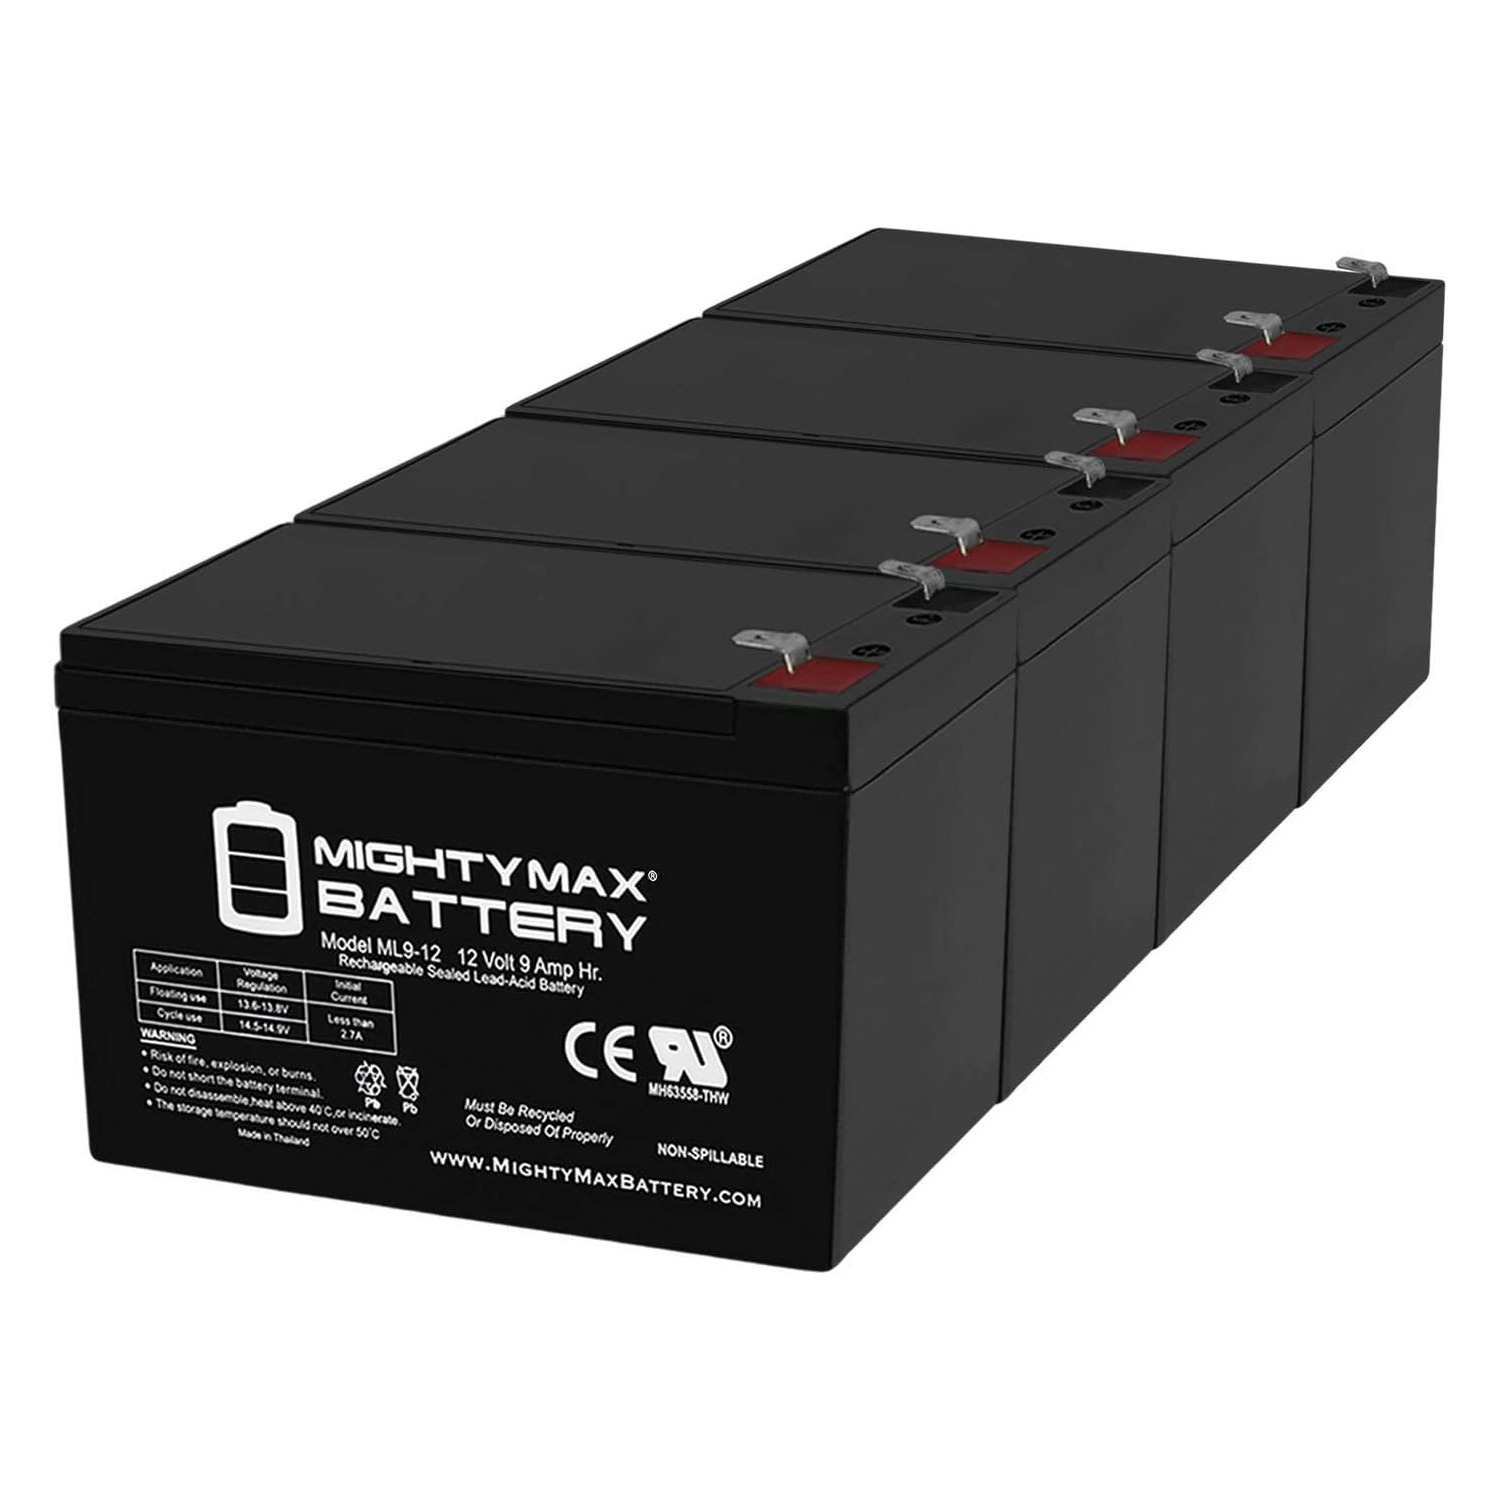 Altronix SMP3PMCTXPD8 12V, 9Ah Lead Acid Battery - 4 Pack